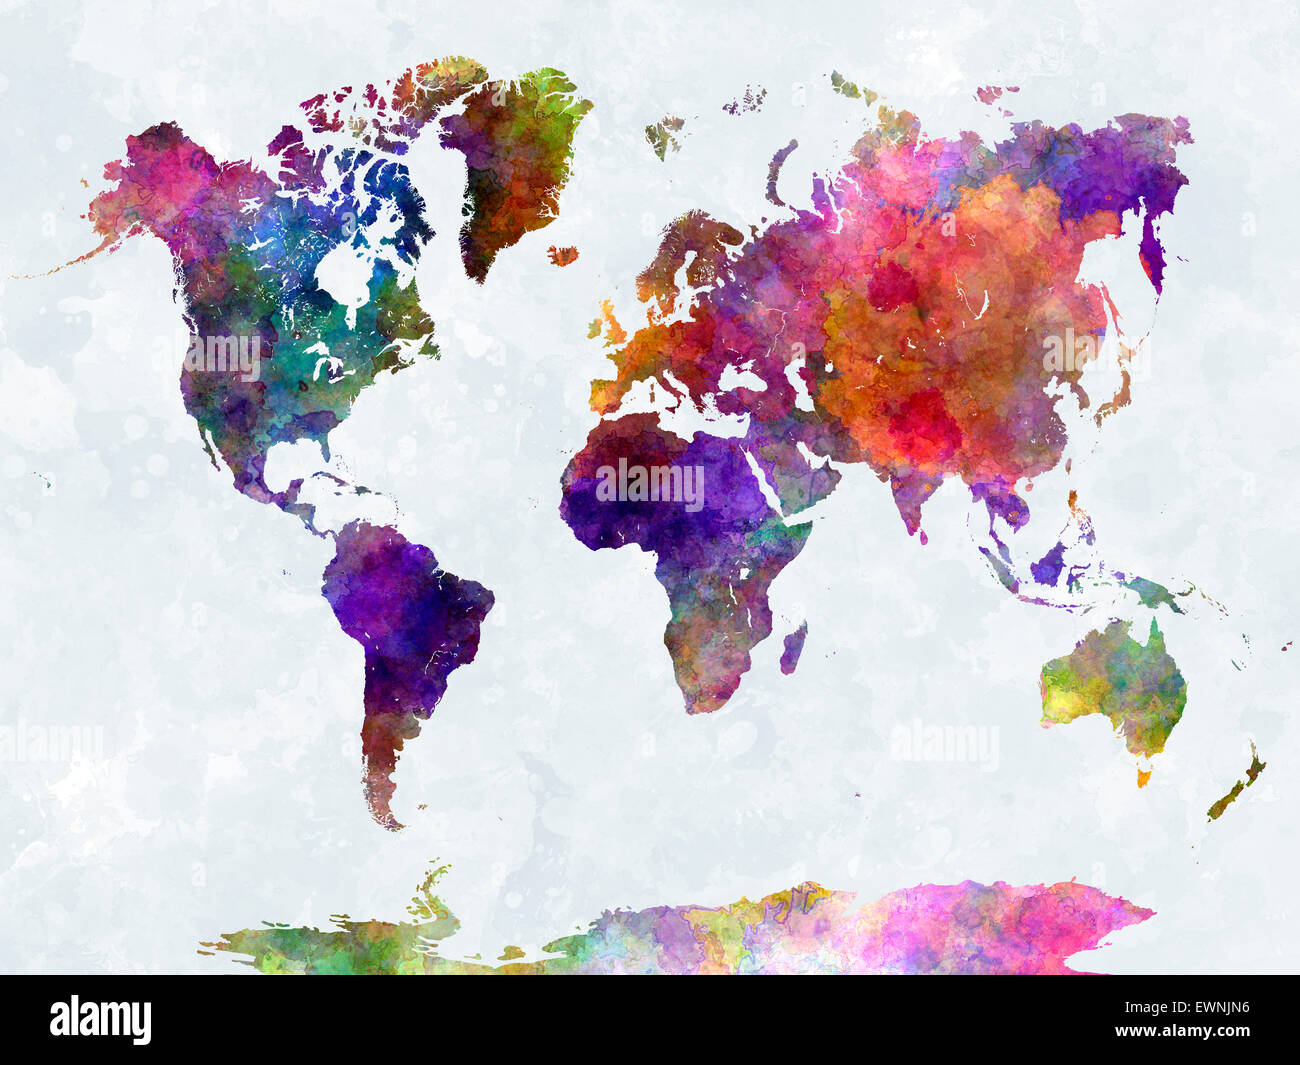 World map in watercolor painting abstract splatters Stock Photo